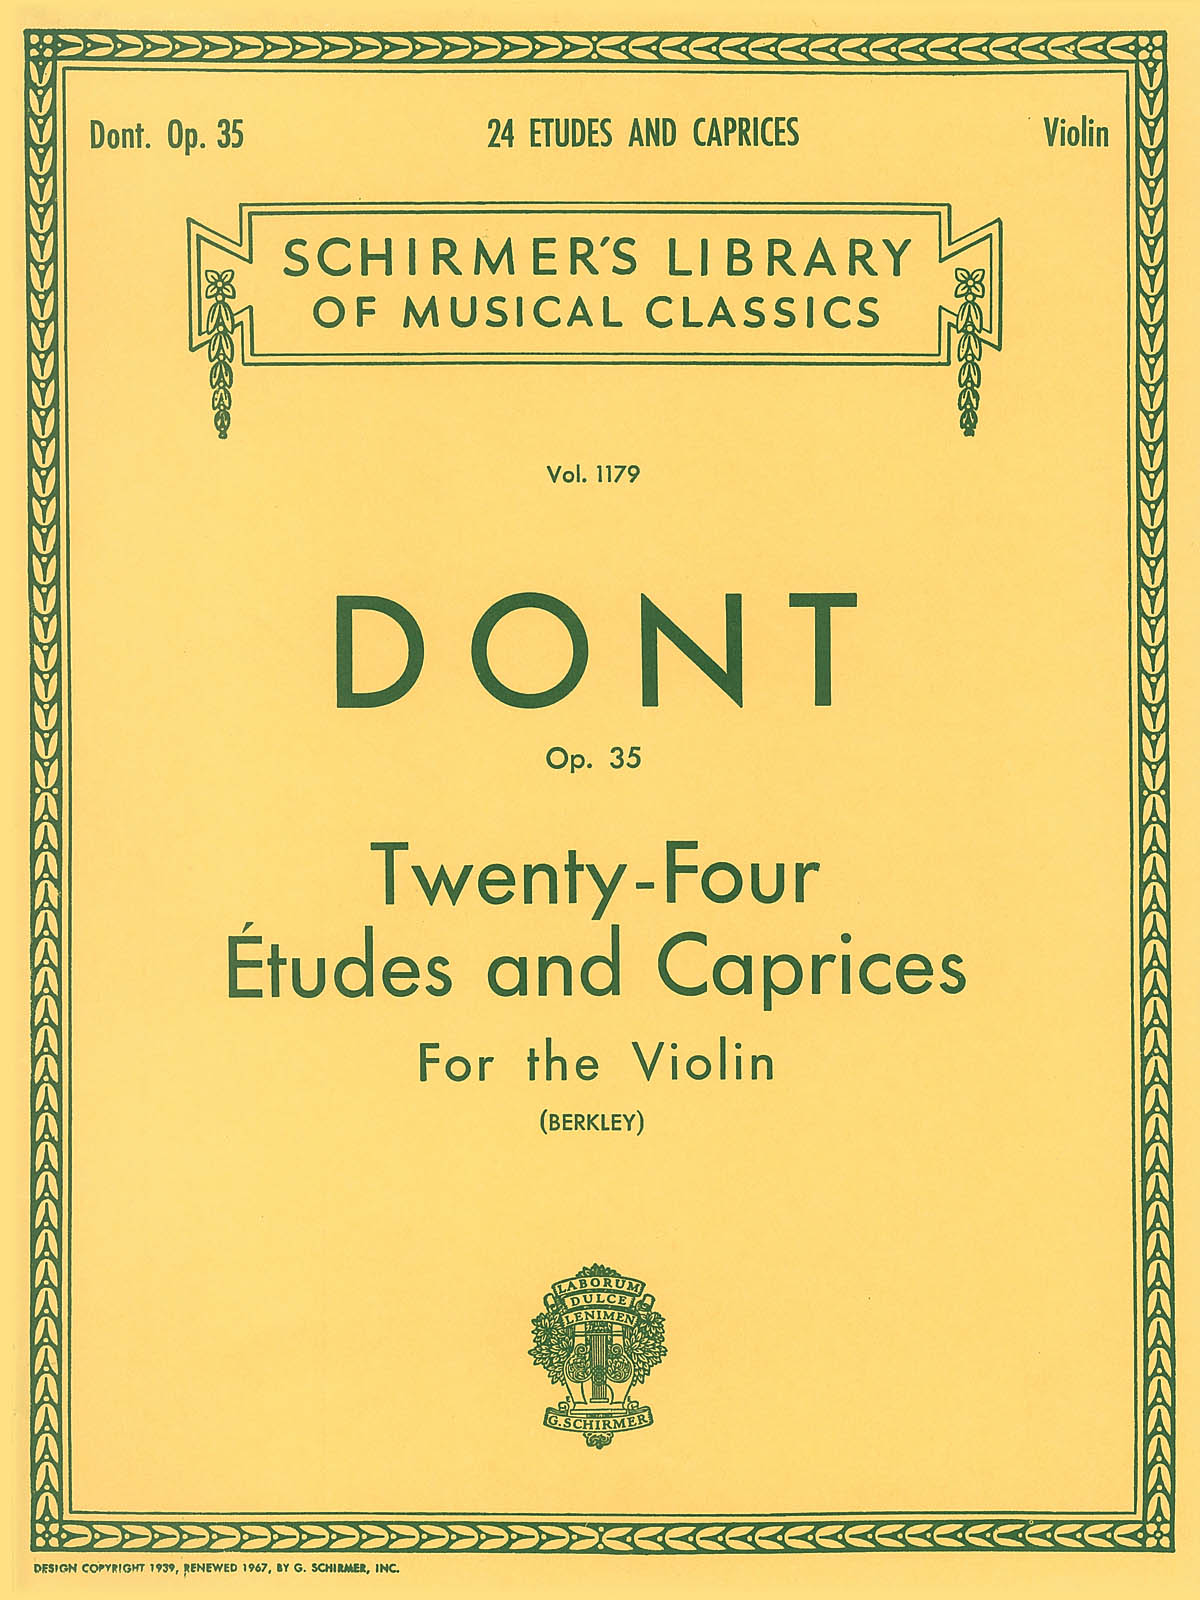 Jakob Dont: 24 Etudes And Caprices For The Violin (Berkley)